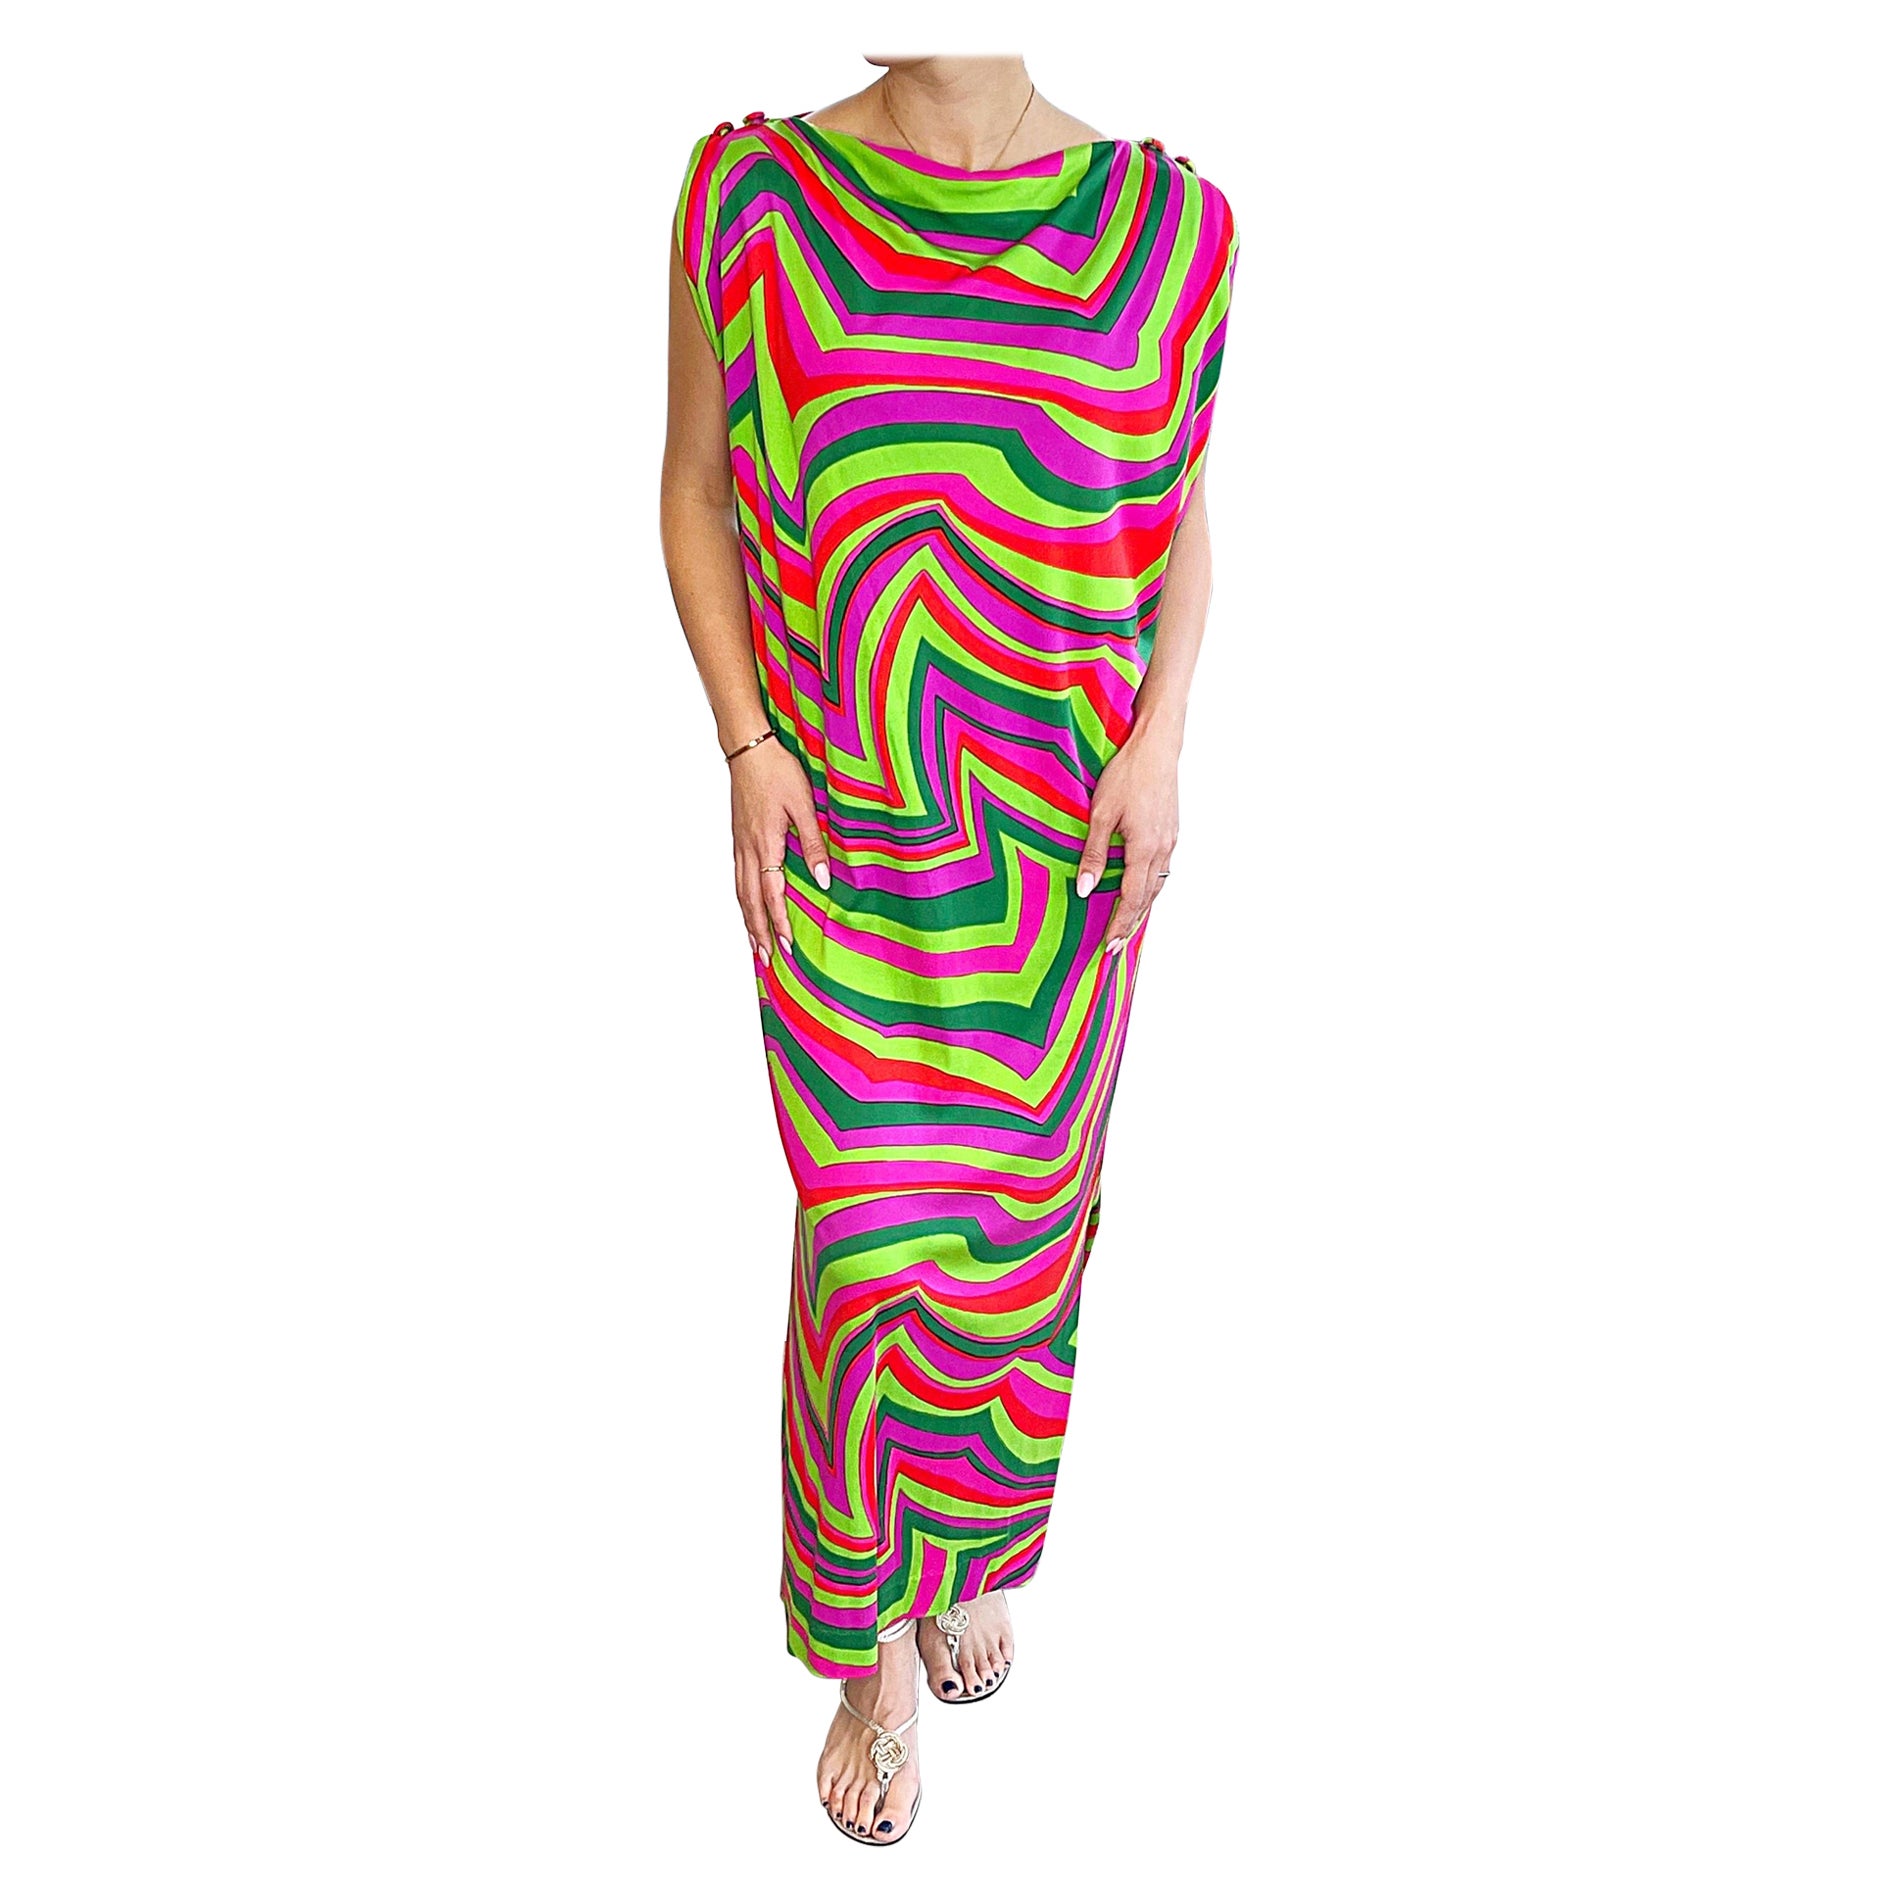 Amazing 1970s Pucci Style Colorful Pink Green Jersey Vintage Caftan Maxi Dress For Sale